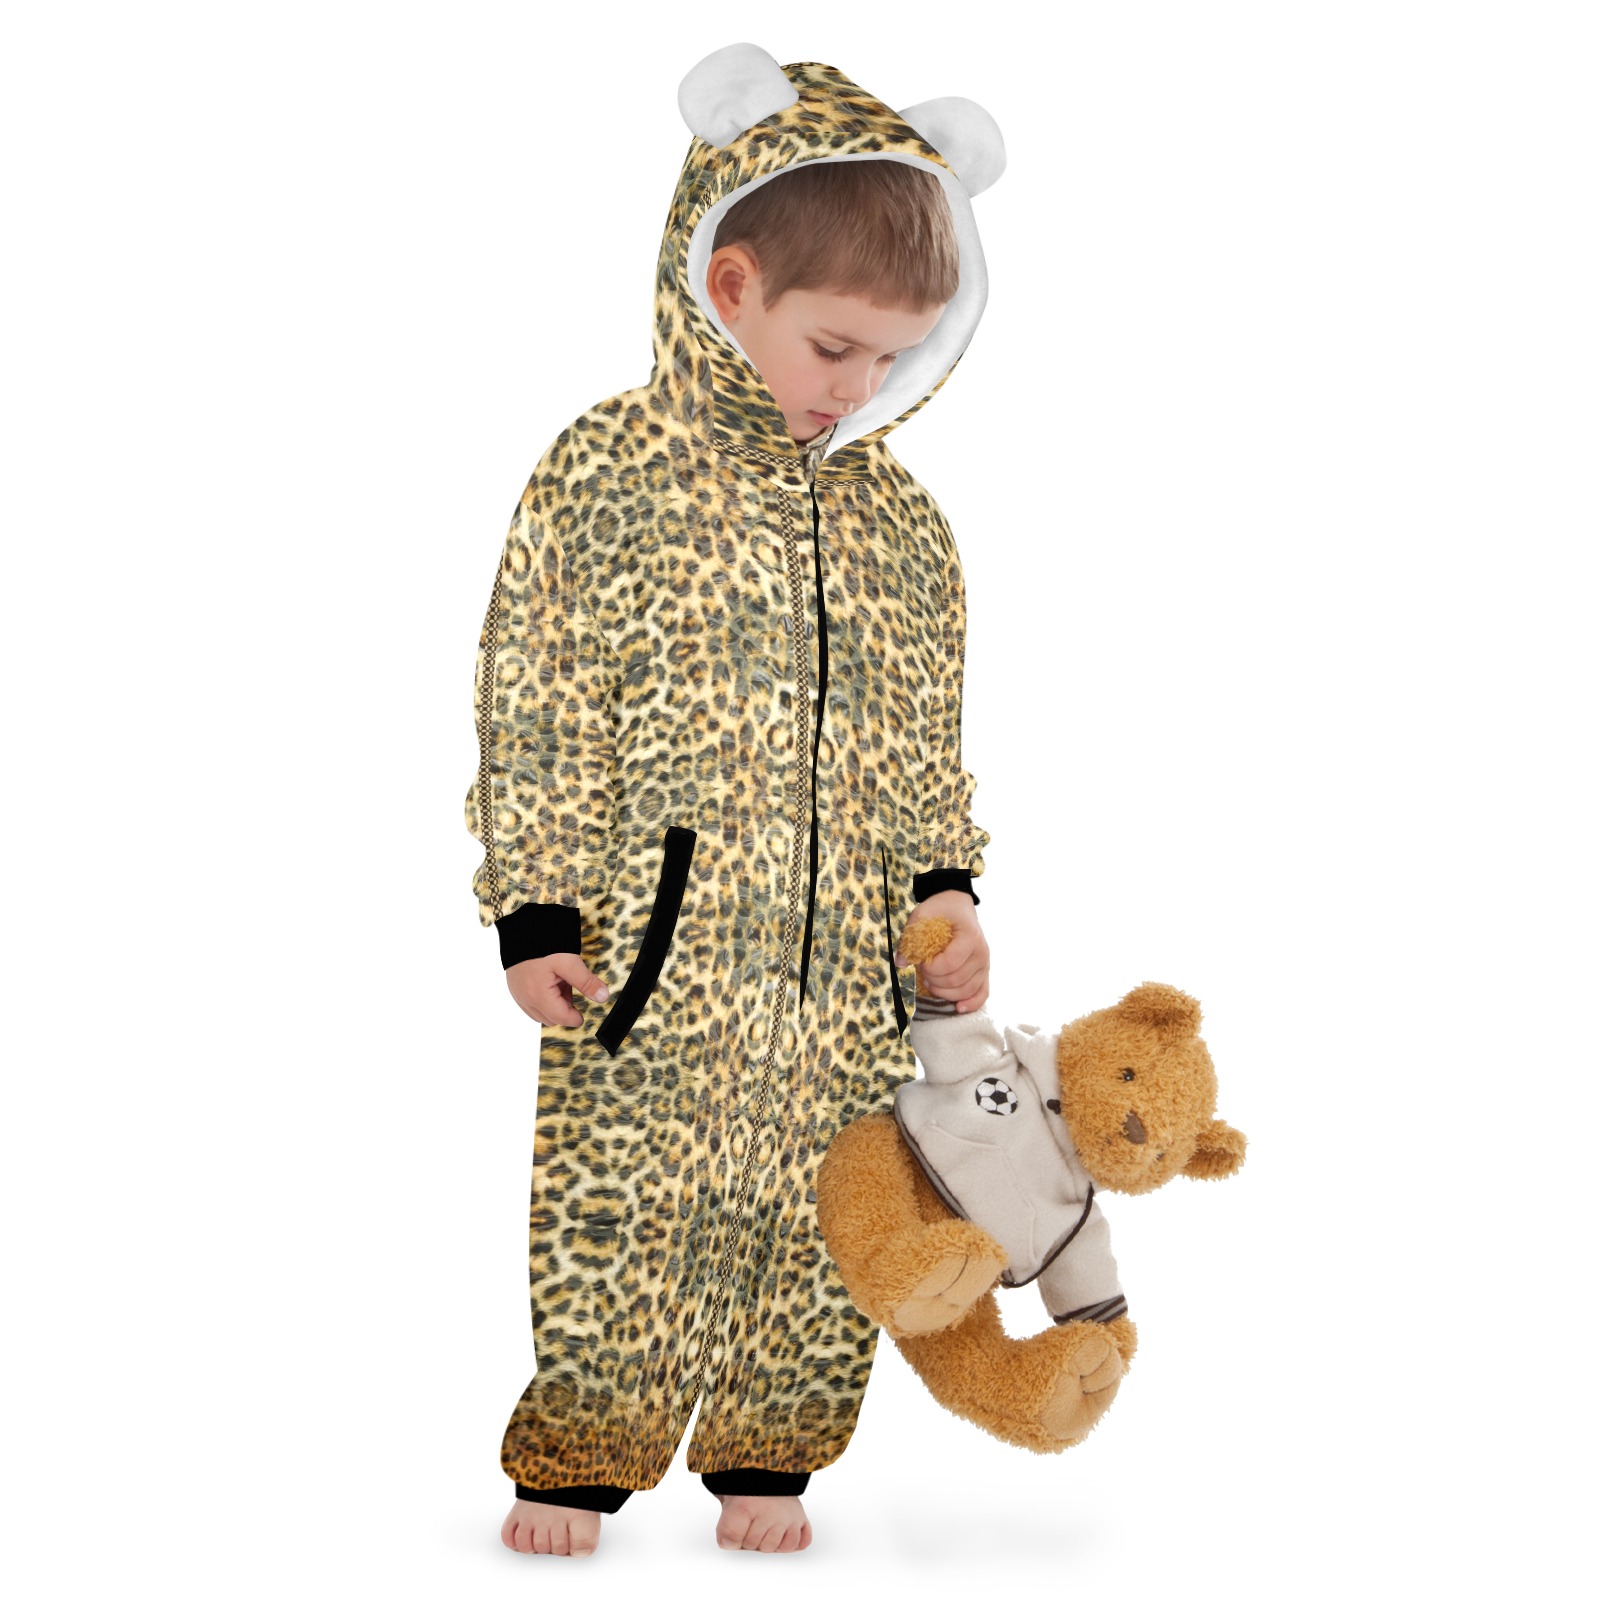 puma no feathers One-Piece Zip up Hooded Pajamas for Little Kids